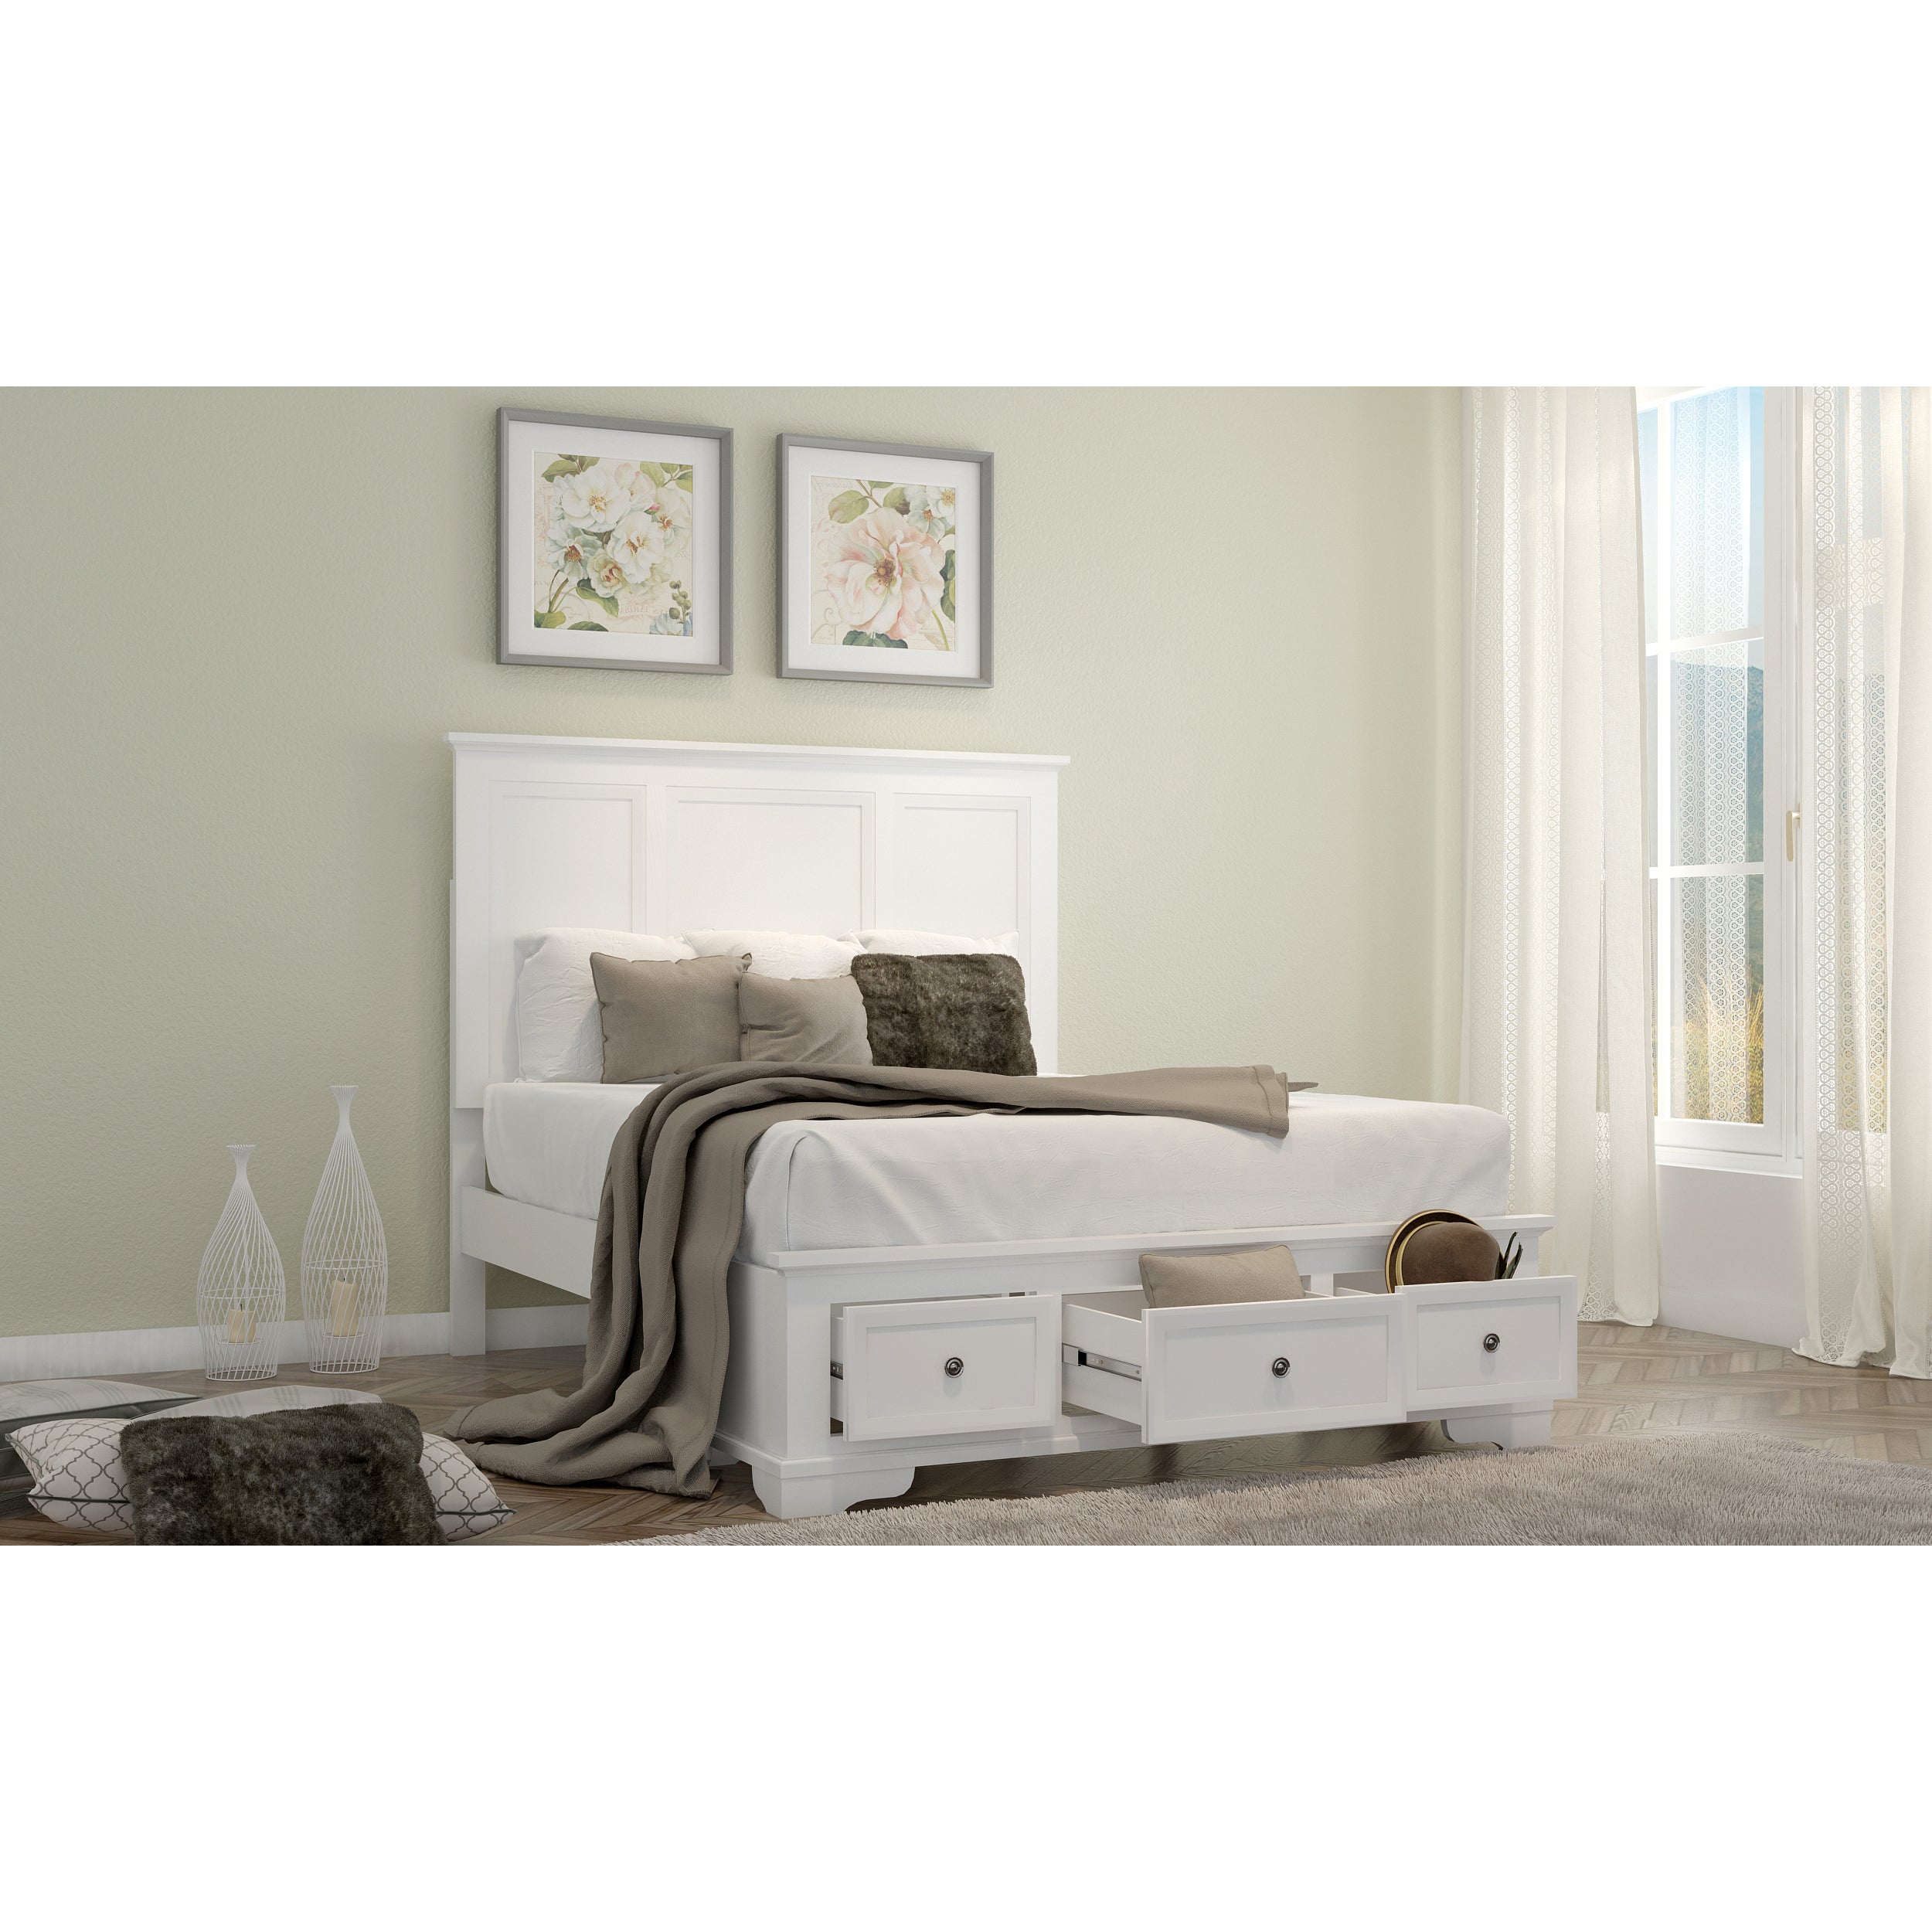 Back In Stock! King Size Bed Frame With Headboard and Storage Drawers - White